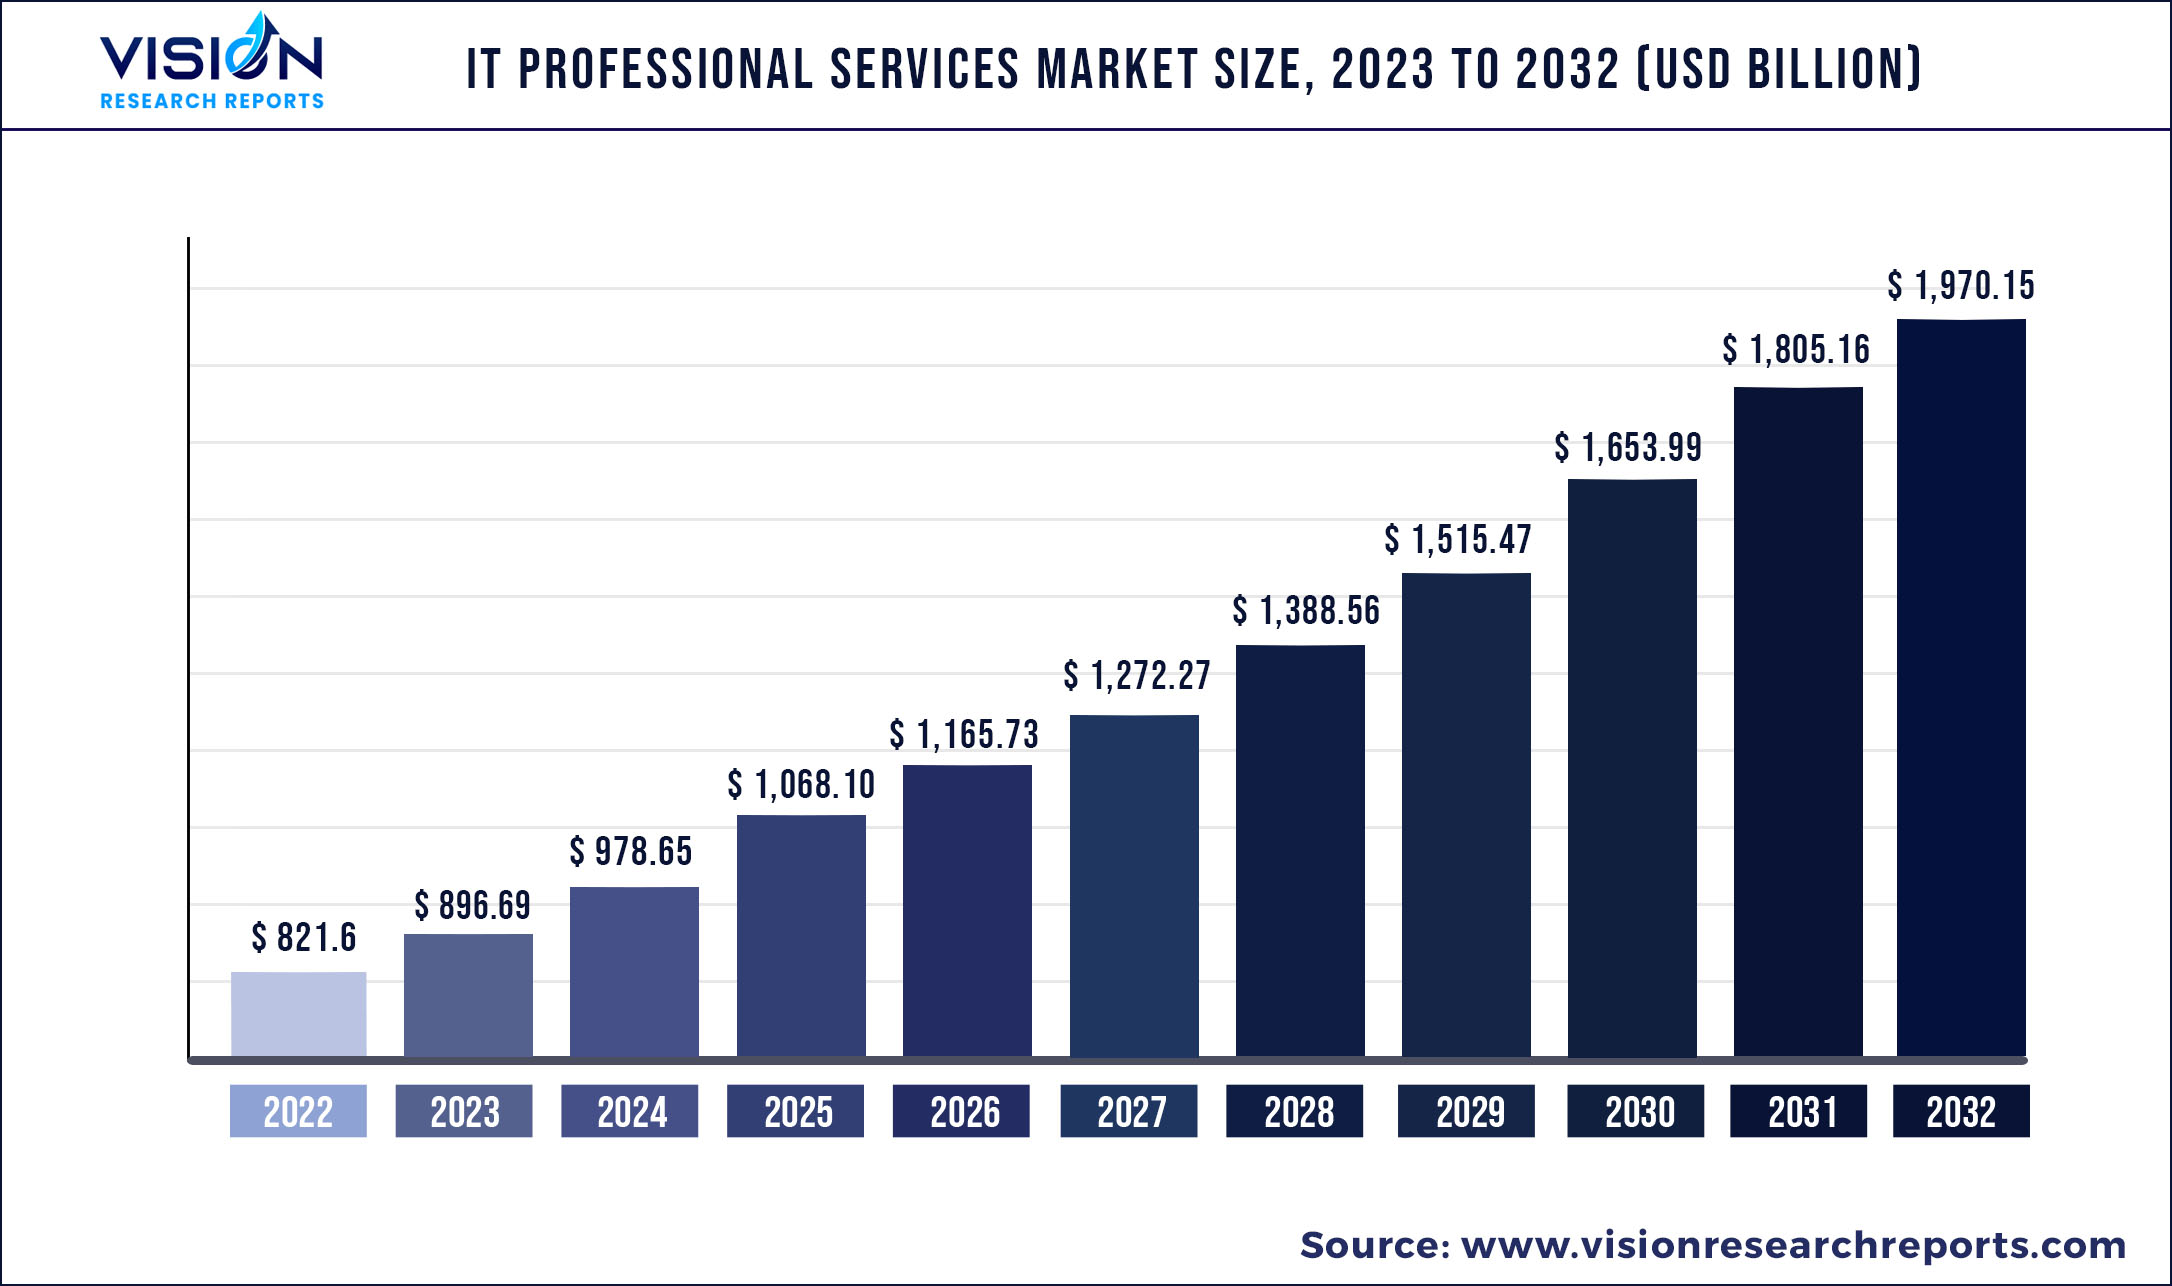 IT Professional Services Market Size 2023 to 2032